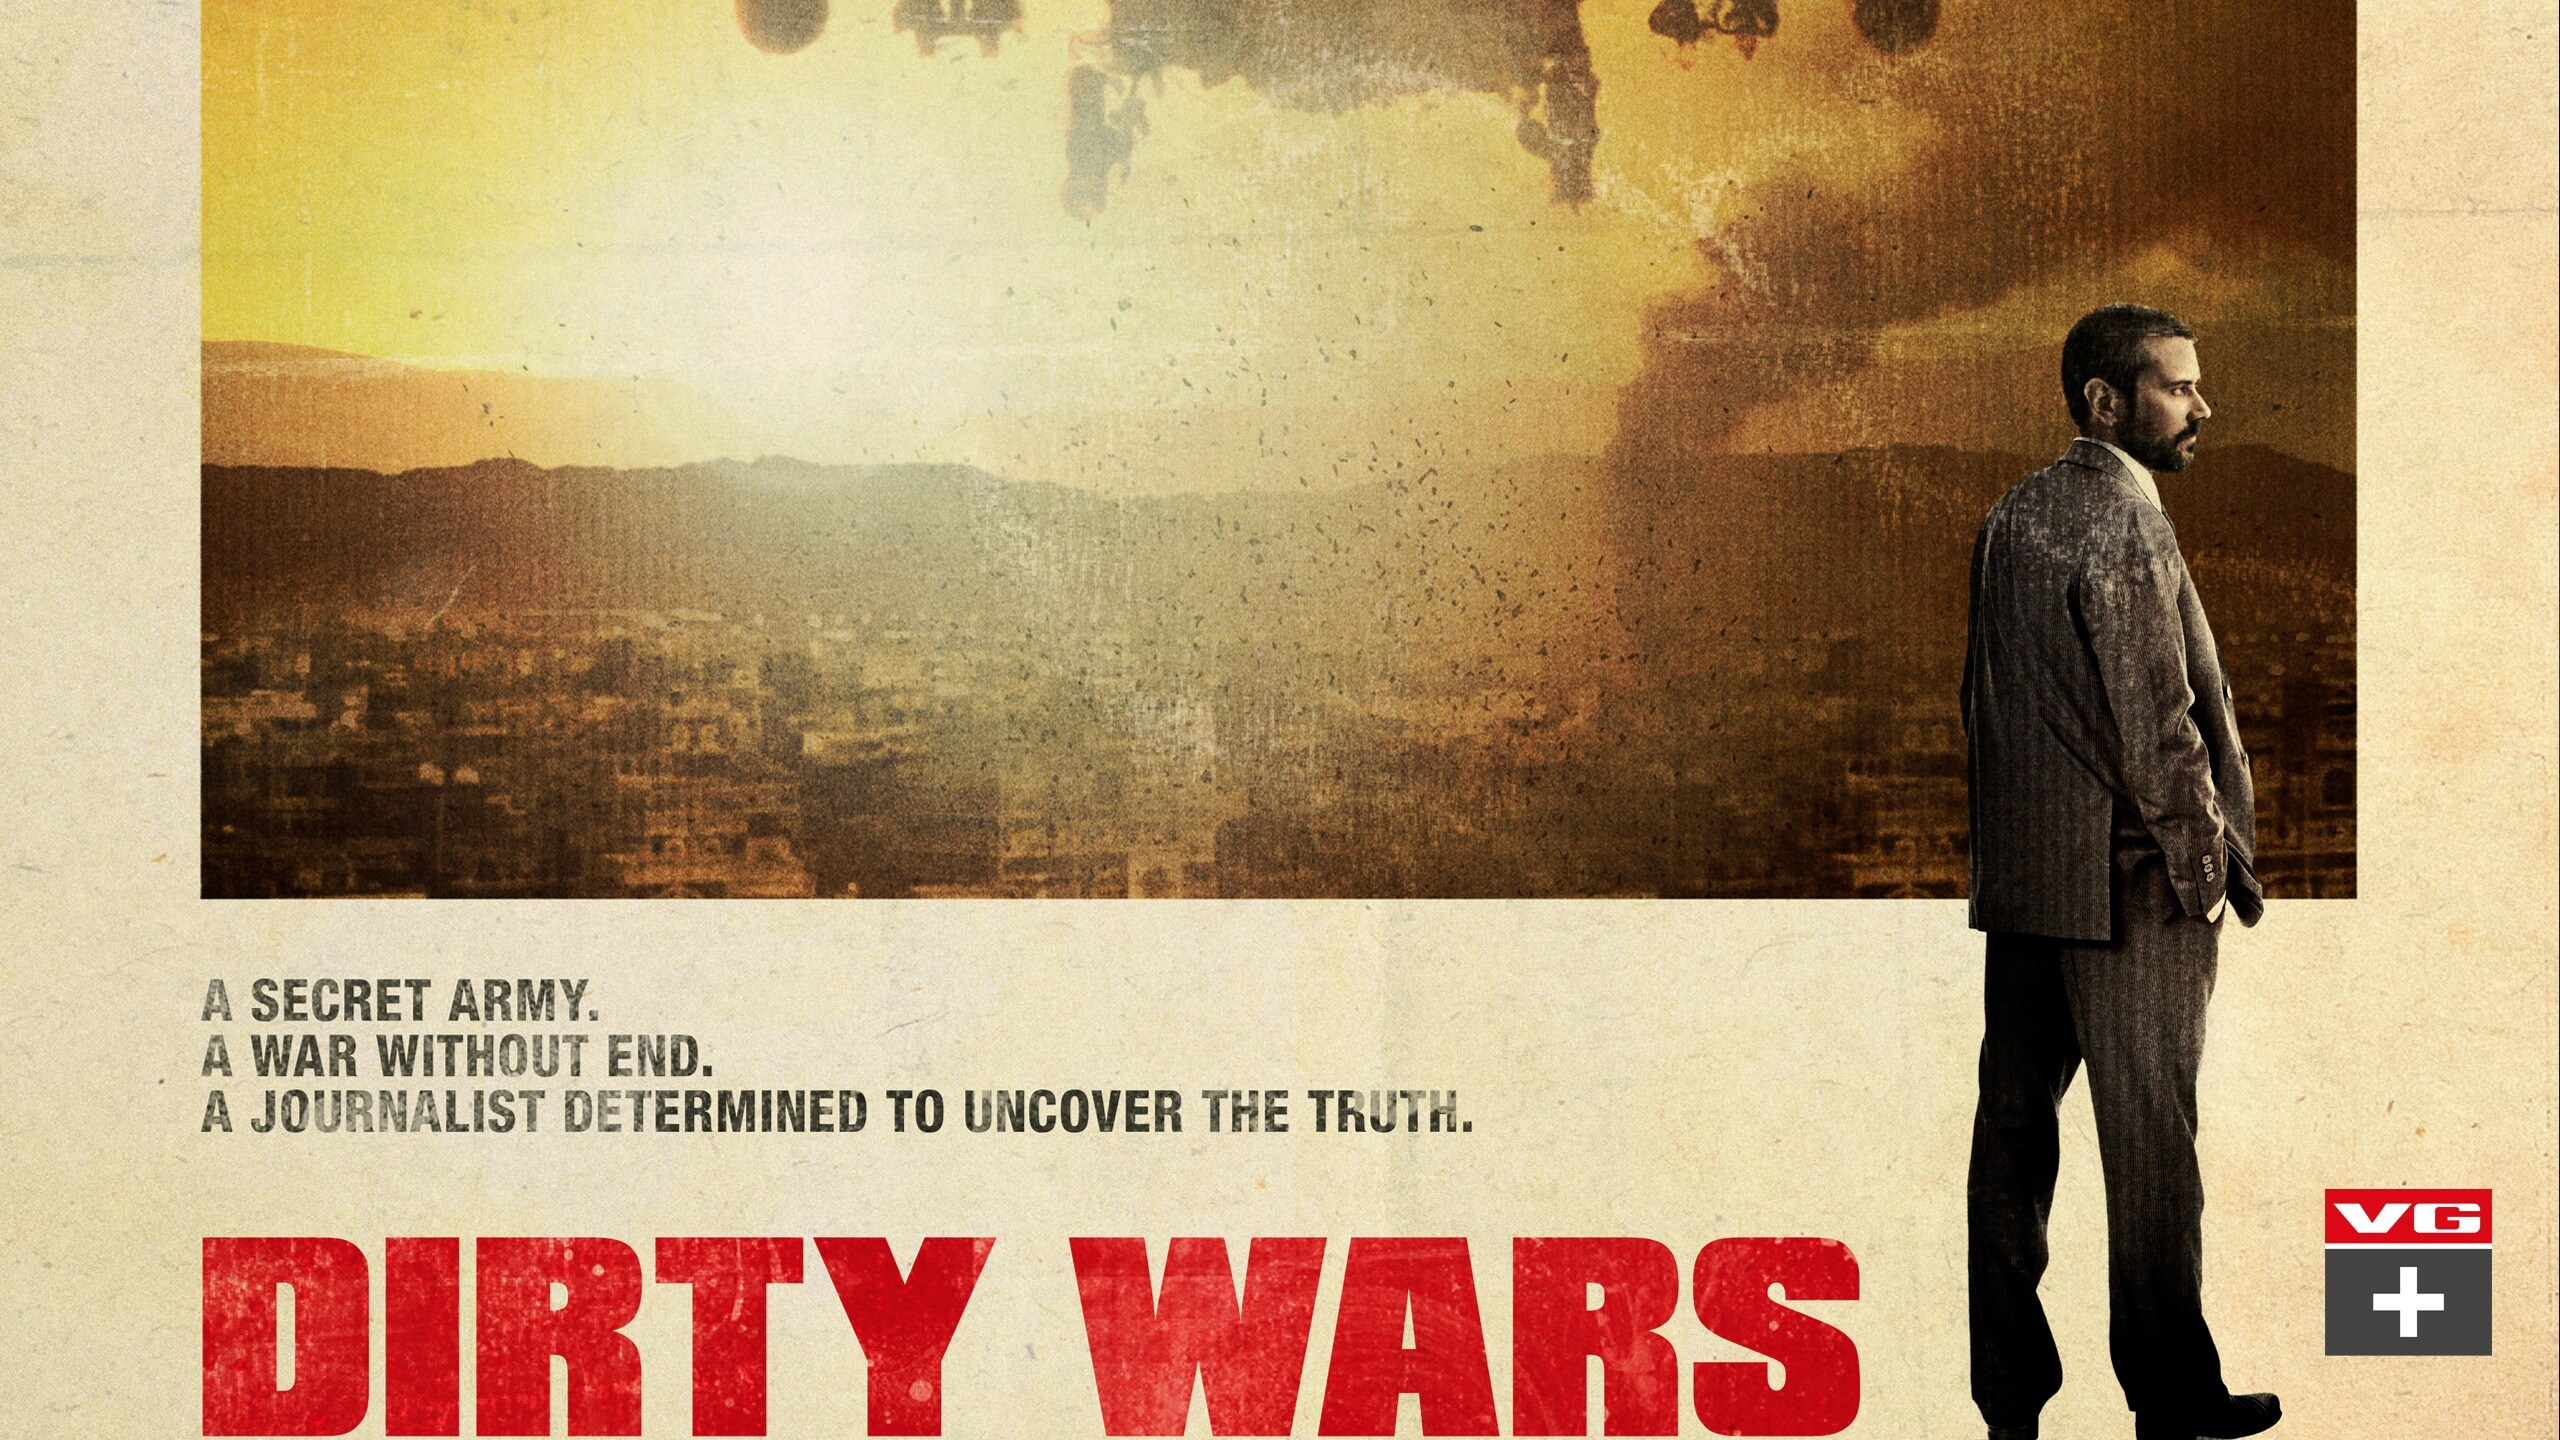 Dirty Wars 2013. Uncover Wars.